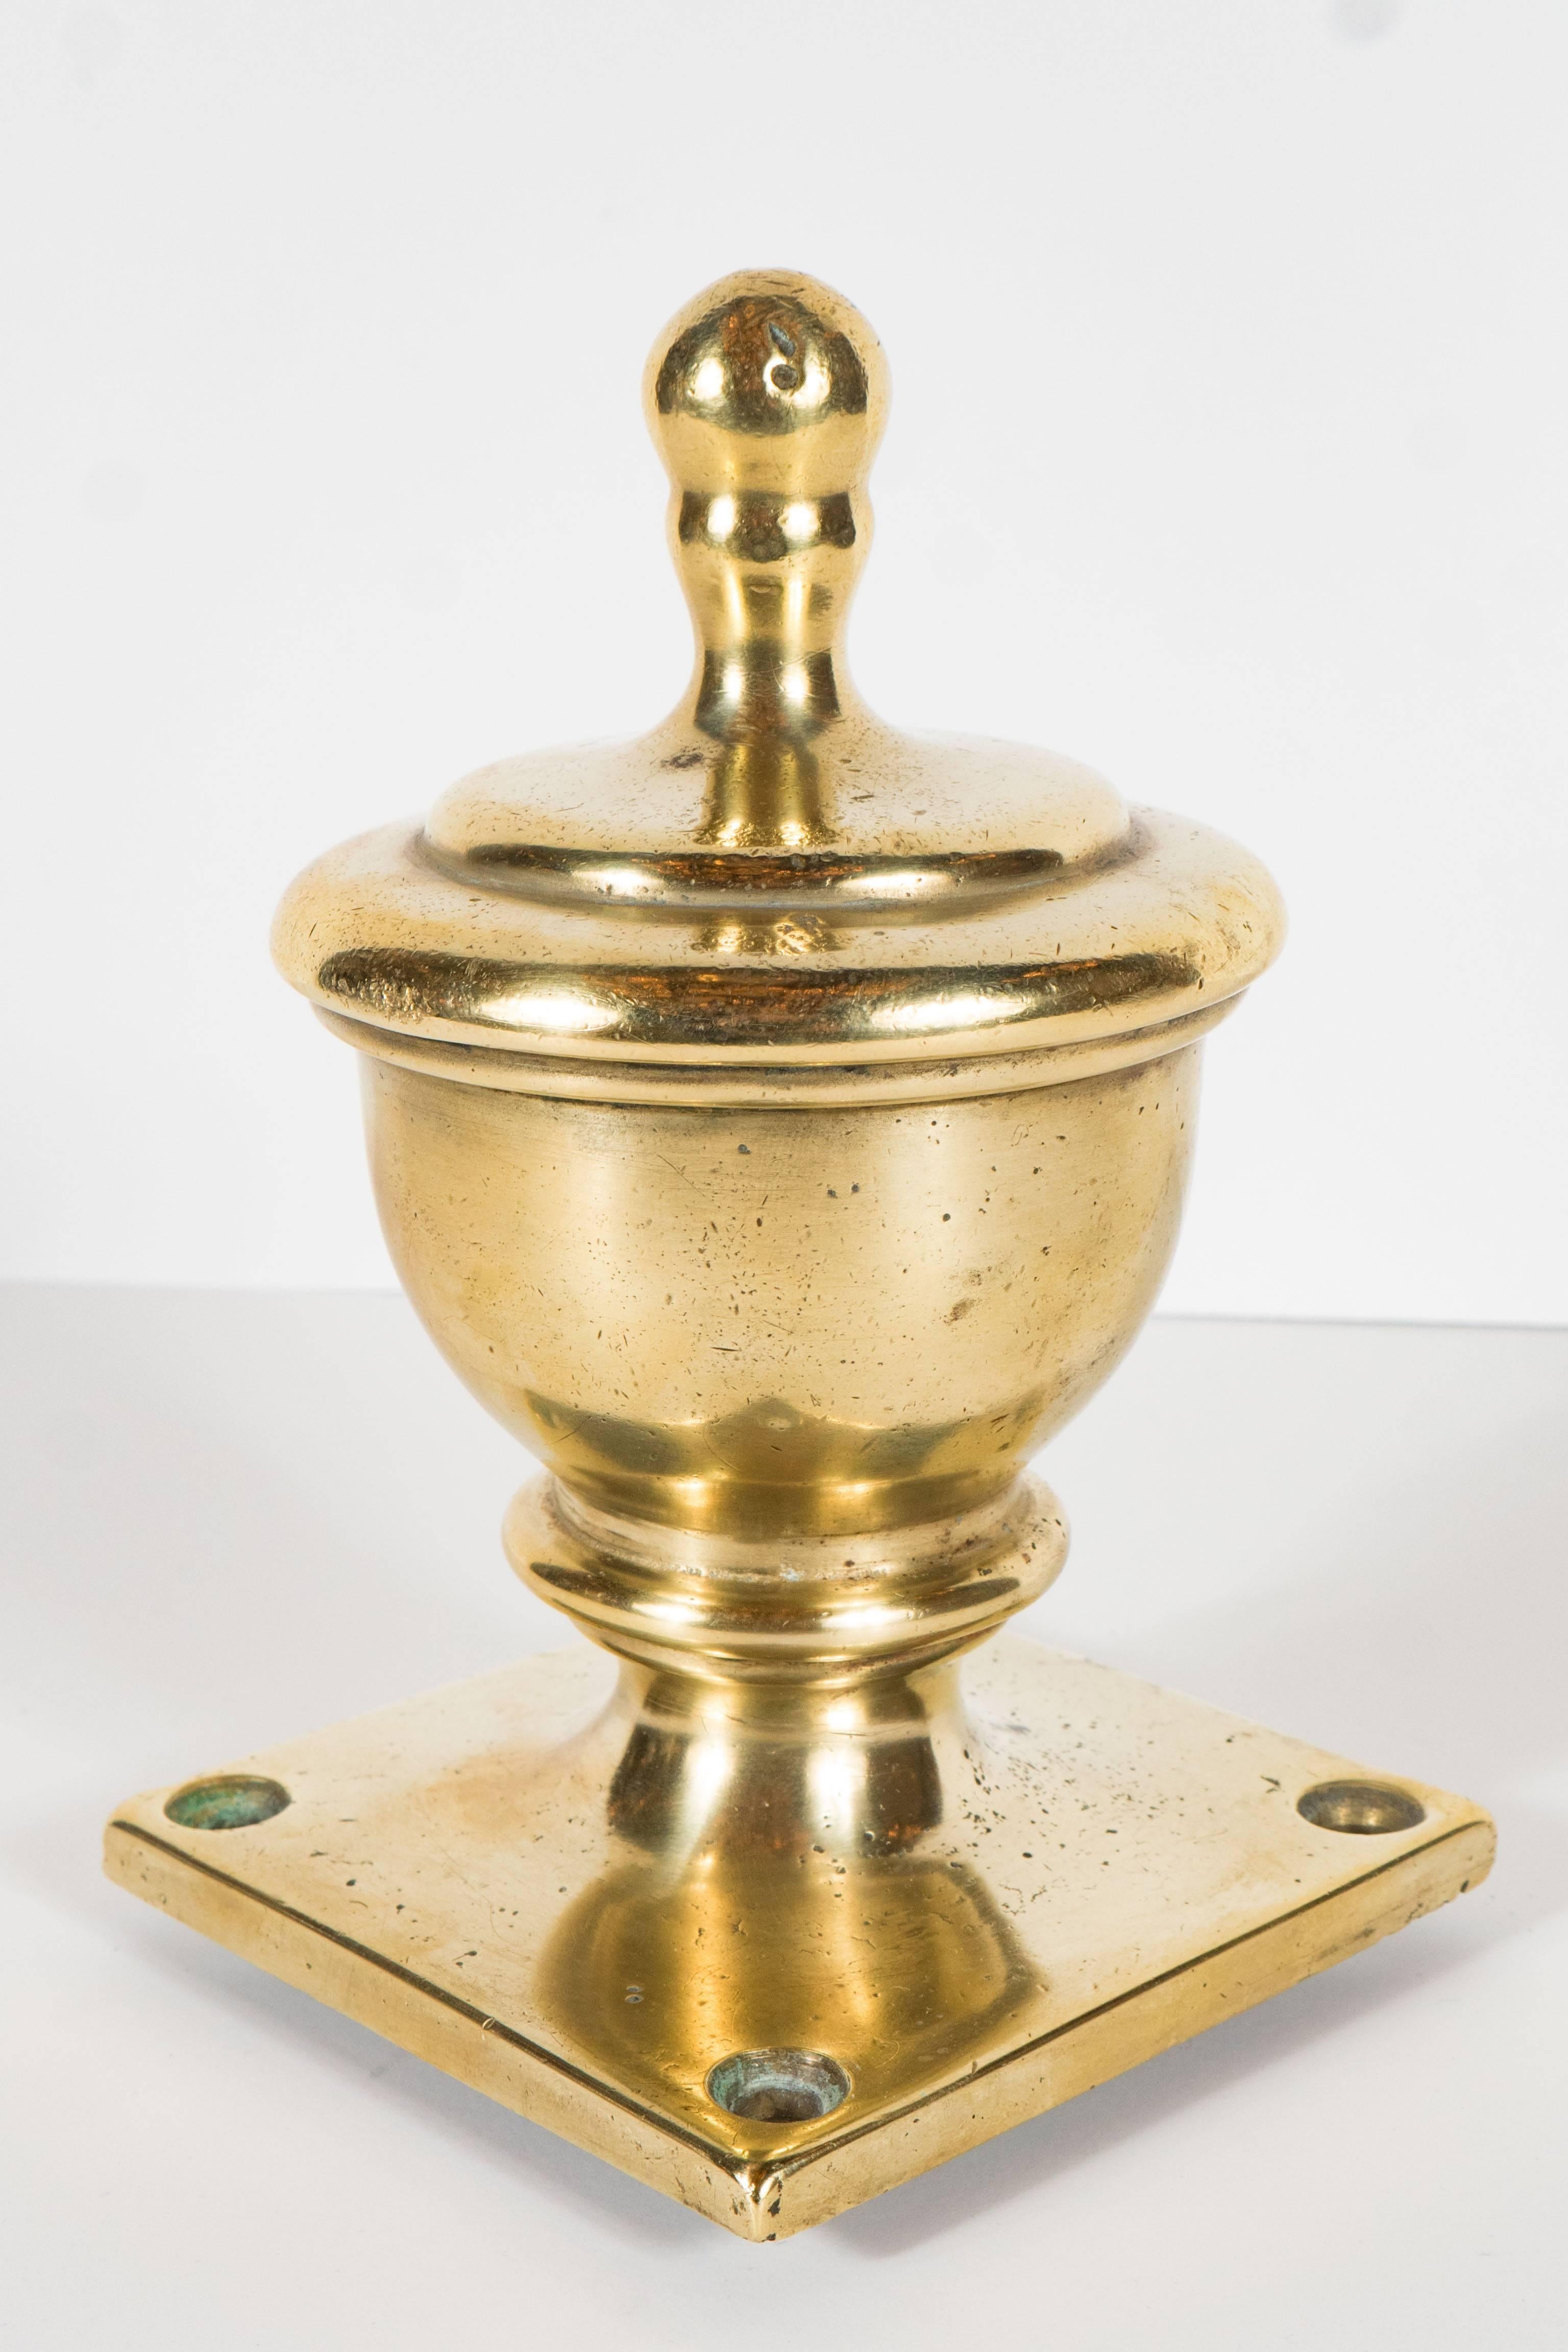 This weighty solid brass finial adds the perfect antique character to a newel post or any other architectural detail or accent. It has a perfect patina and is in excellent vintage condition.